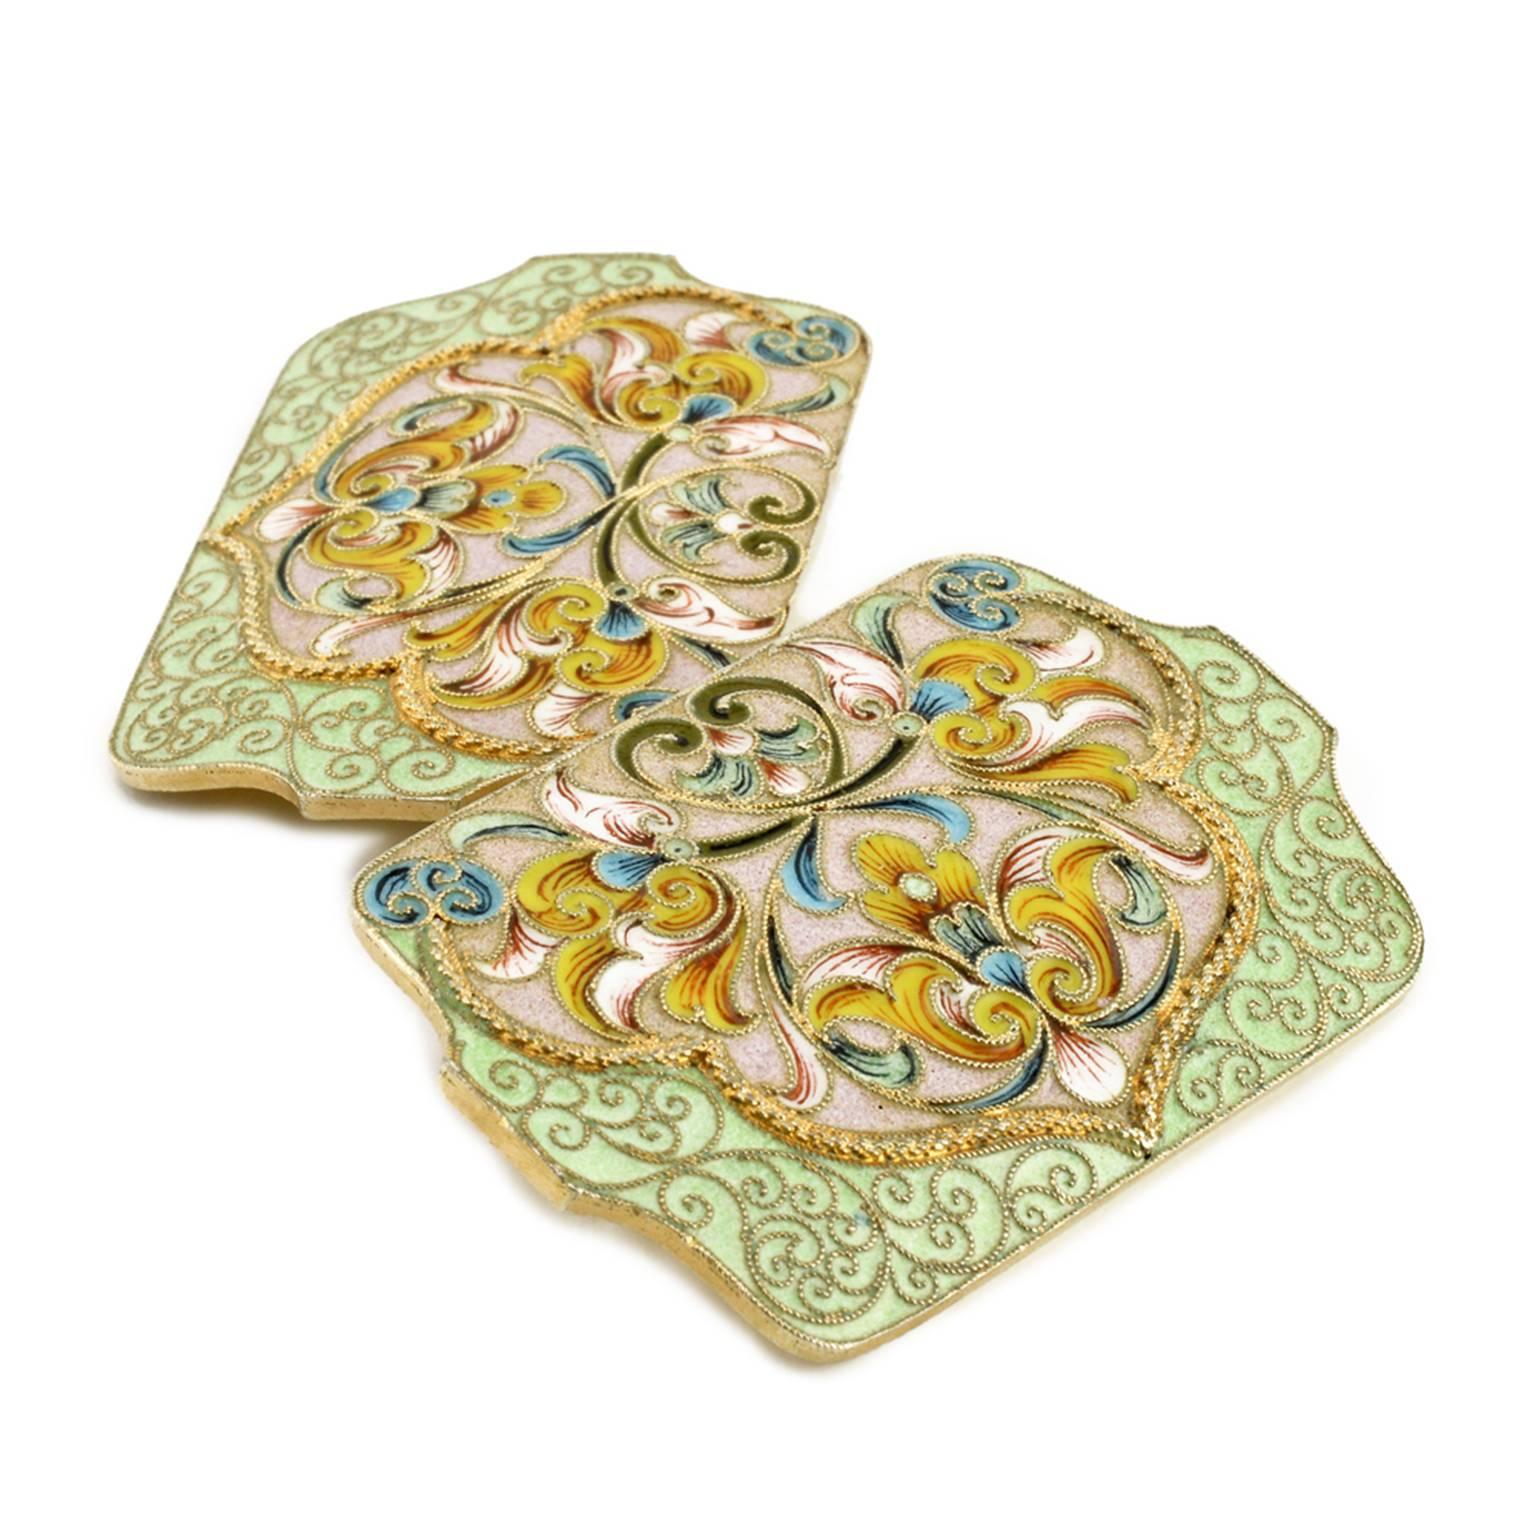 A Russian gilded silver and shaded cloisonné enamel belt buckle, Moscow, circa 1895. Shaped rectangular, enameled with brightly-colored stylized tulips and scrolling ornament against a duck’s egg pale mauve within an ogee-shaped cable border, all